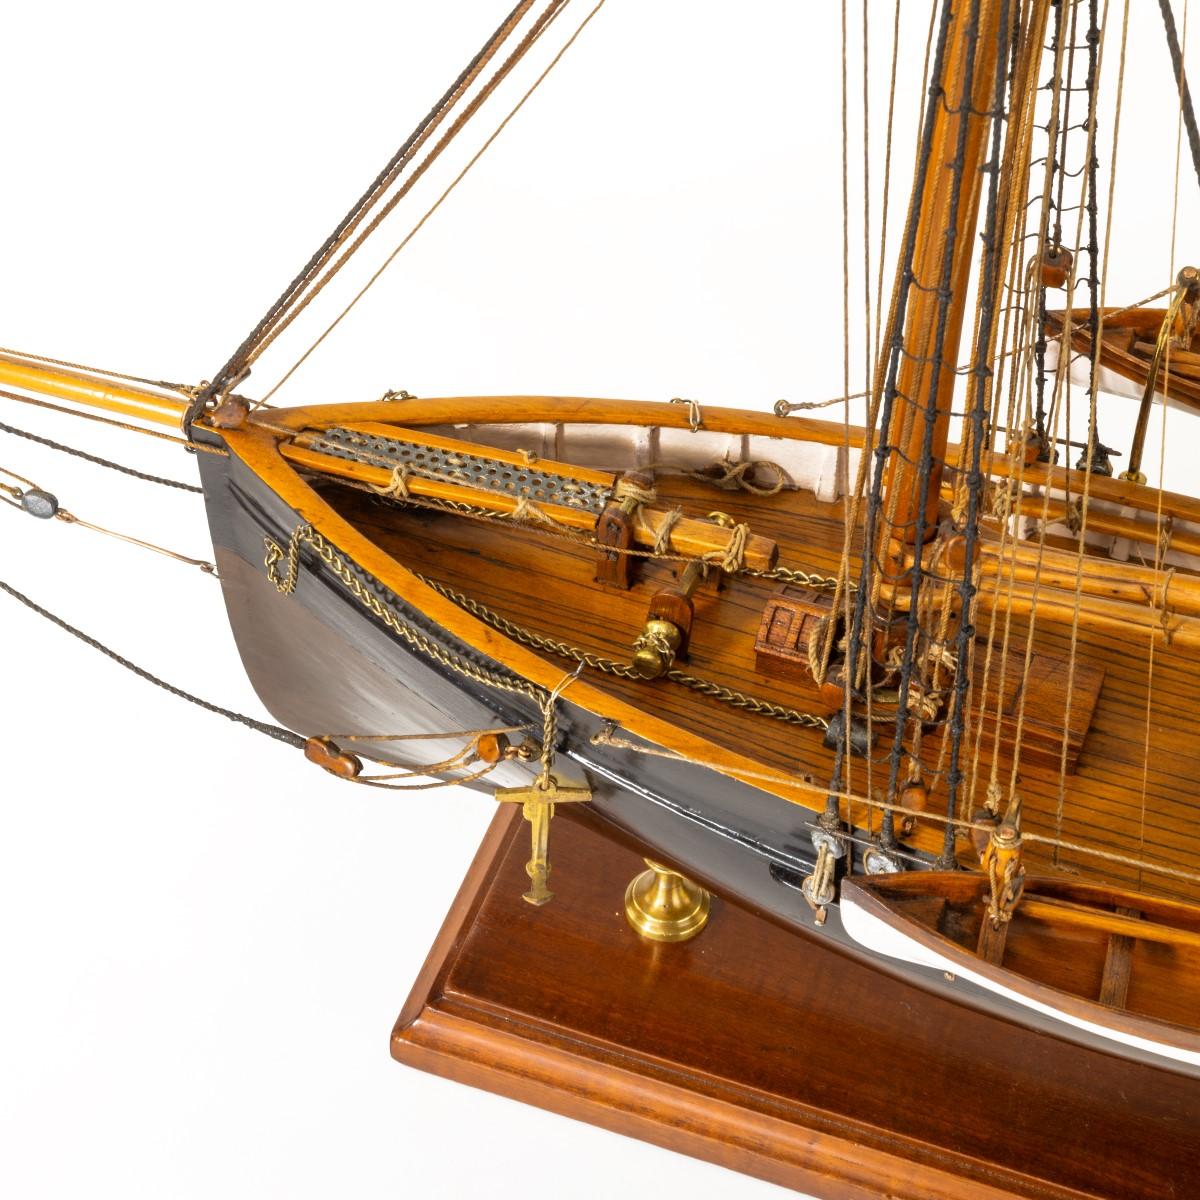 Shipyard Model of a Gaff-Rigged Newhaven Smack 2